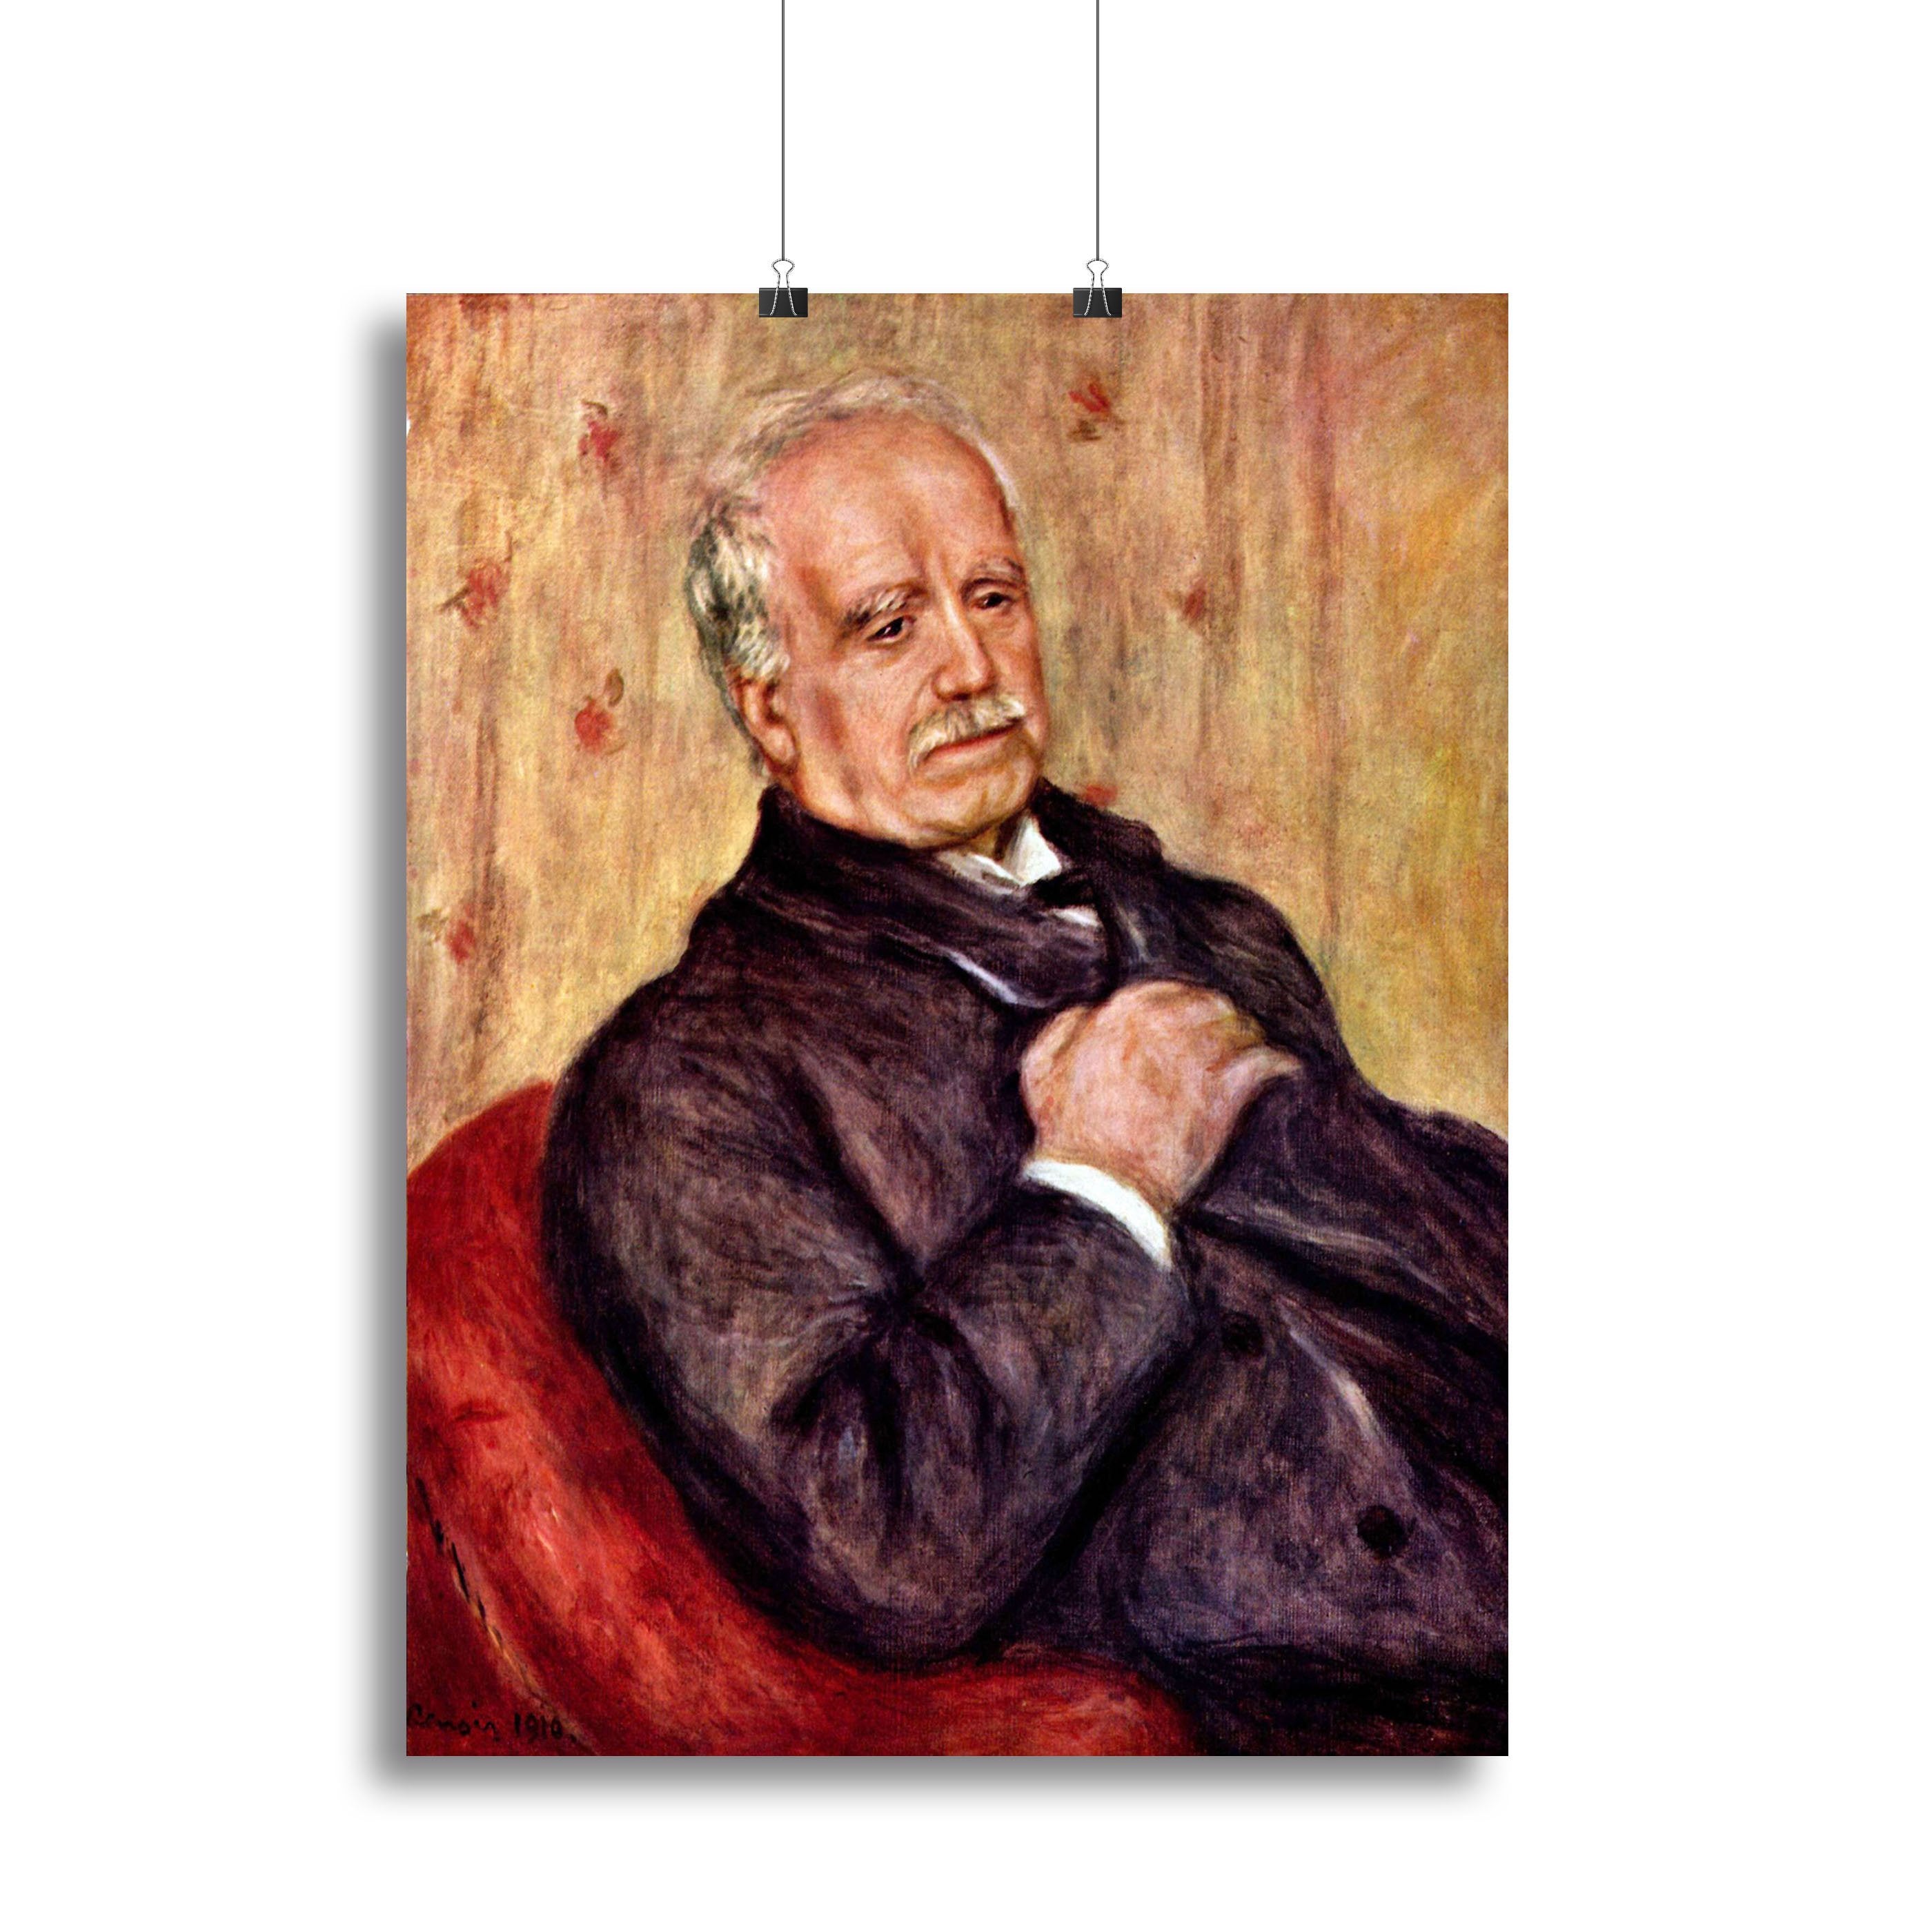 Portrait of Paul Durand Ruel by Renoir Canvas Print or Poster